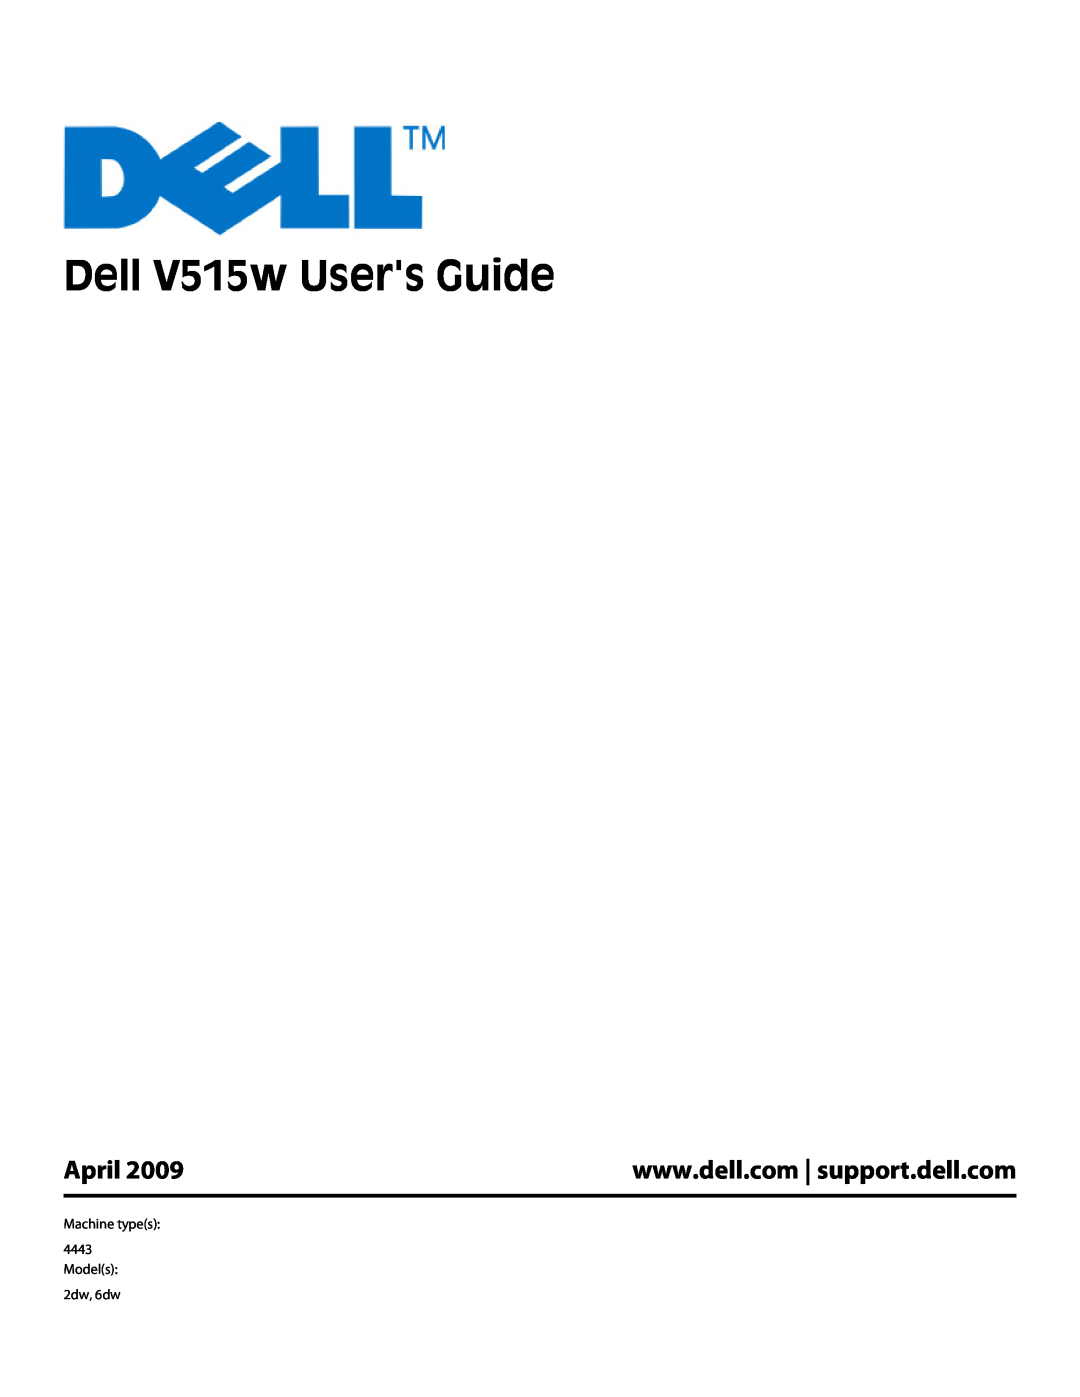 Dell V515W manual Dell V515w Users Guide, April, Machine types 4443 Models 2dw, 6dw 